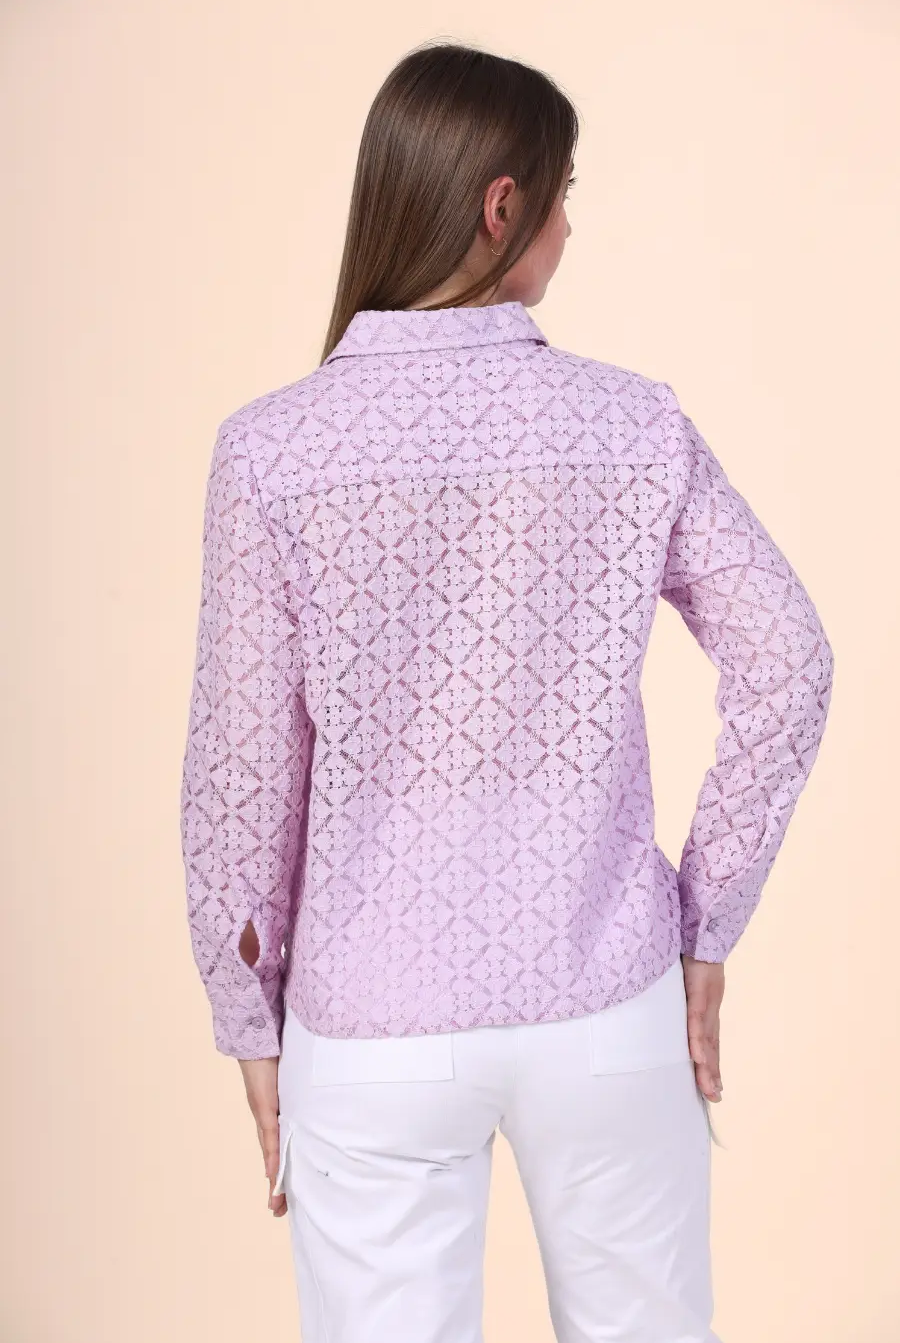 a woman wearing a pink shirt made from winslet's button down shirt sewing pattern and white pants